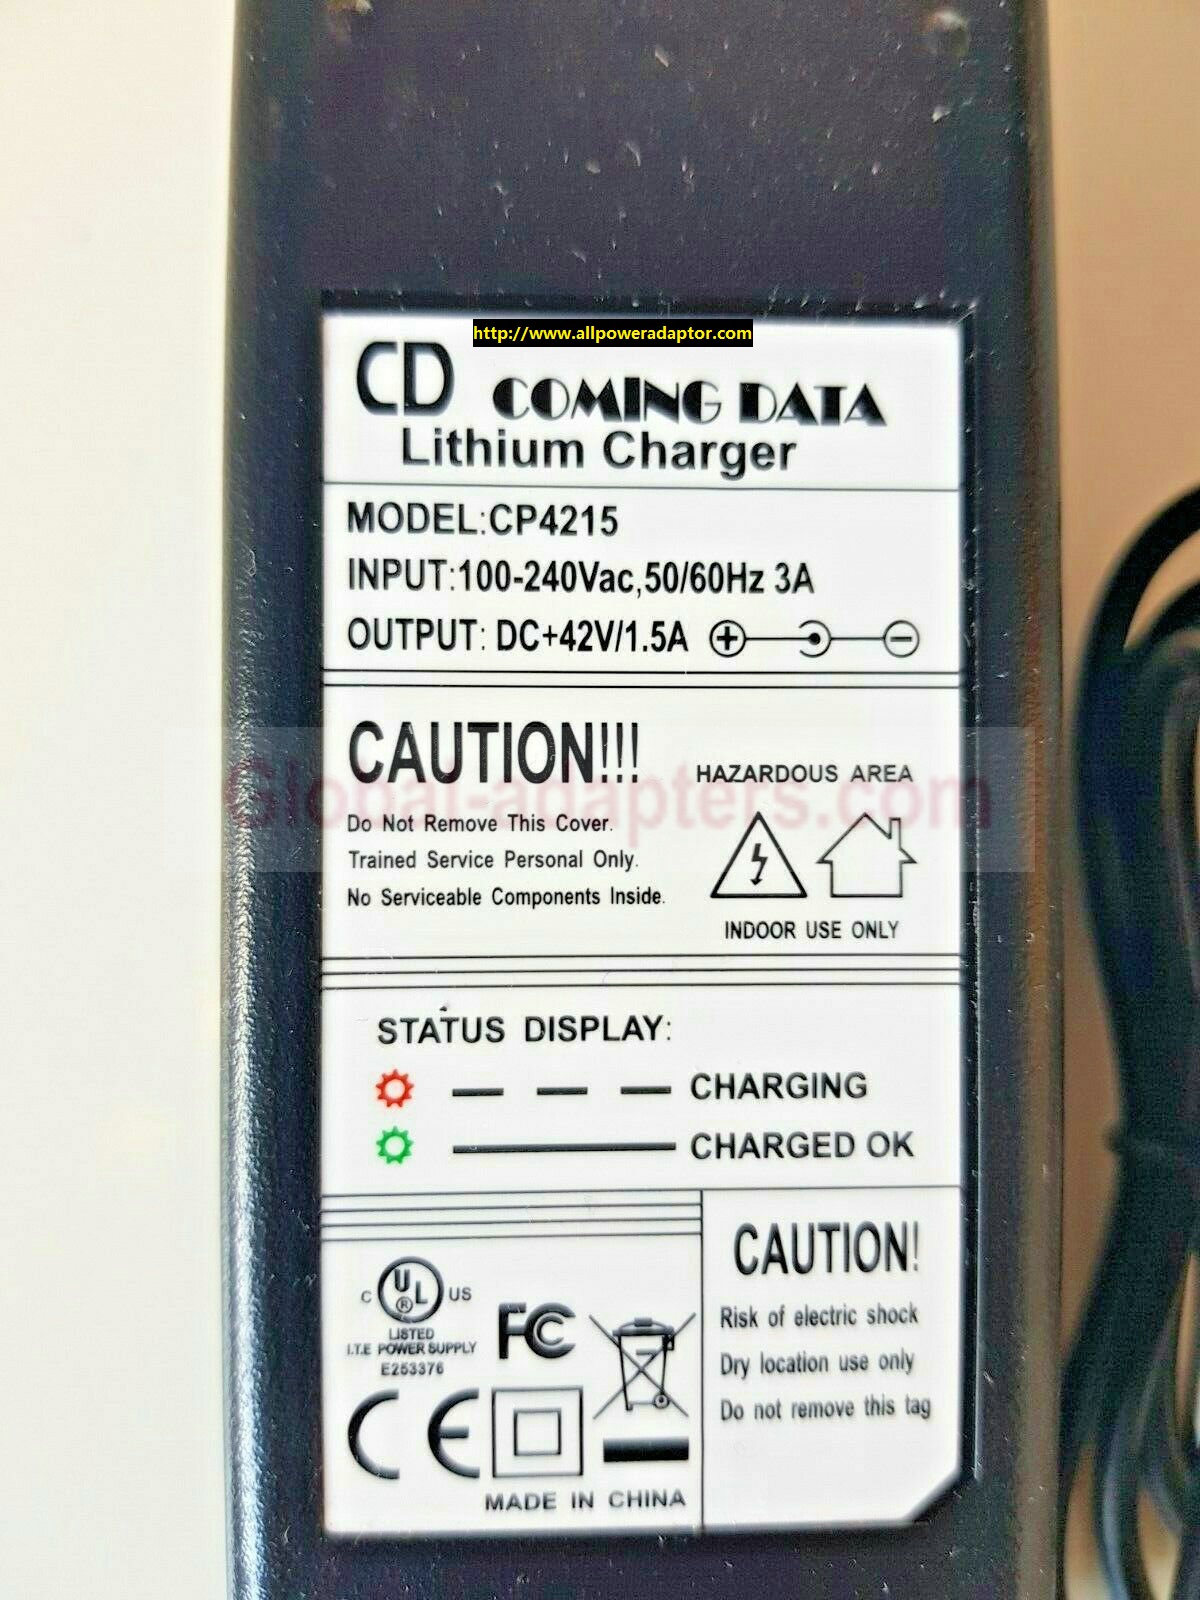 NEW COMING DATA LITHIUM CHARGER 42V DC 1.5A CP4215 CD-SCOOTER CHARGER BARREL CONNECT